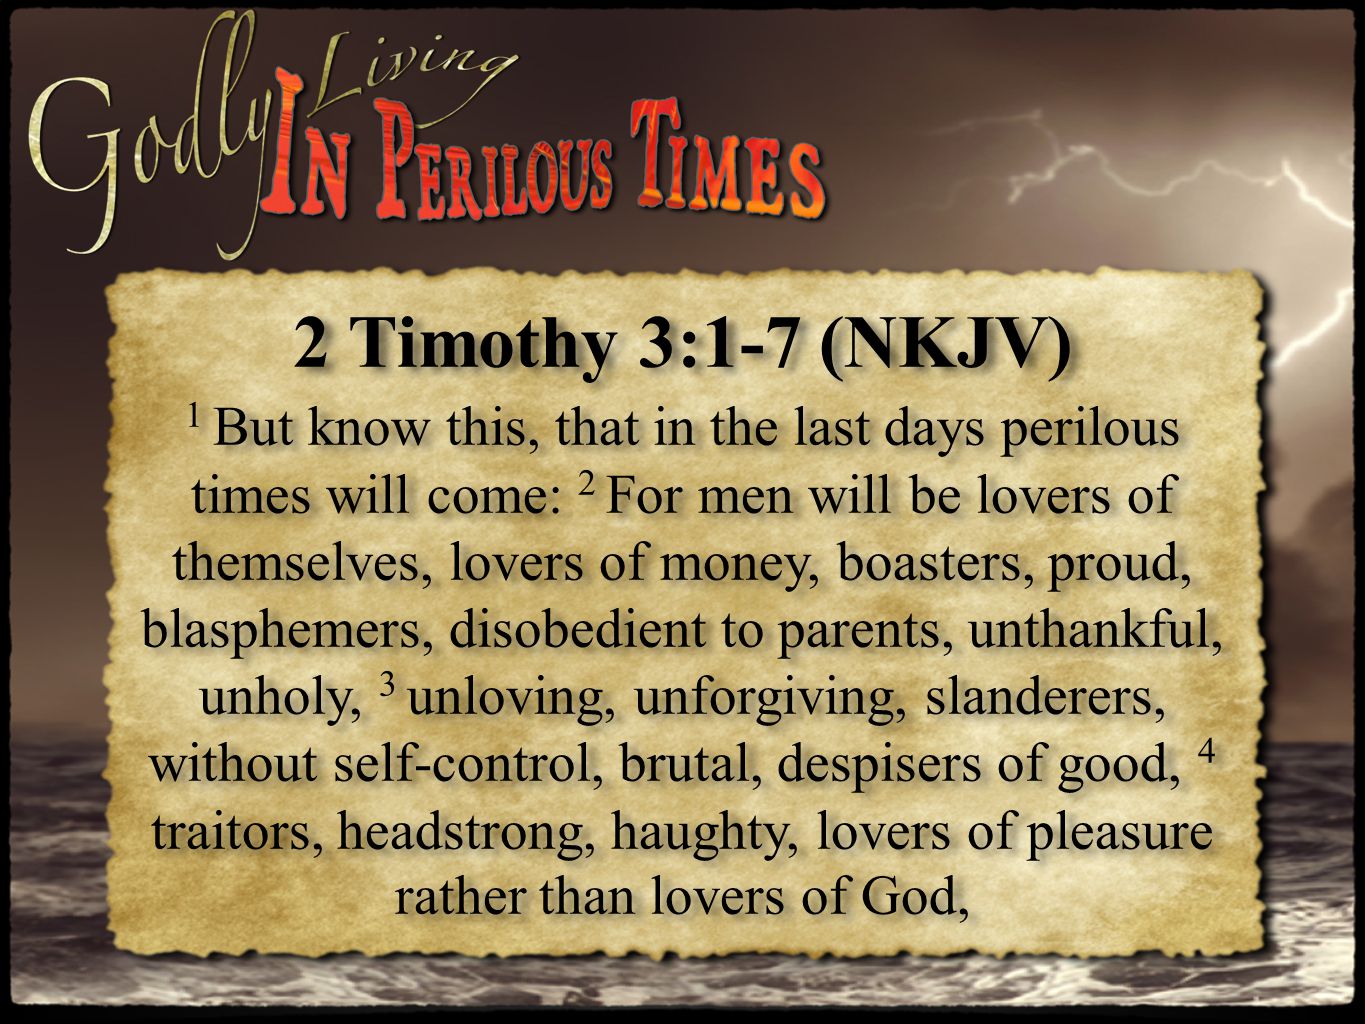 2 Timothy 3:1-7 (NKJV) 1 But know this, that in the last days perilous times will come: 2 For men will be lovers of themselves, lovers of money, boasters, proud, blasphemers, disobedient to parents, unthankful, unholy, 3 unloving, unforgiving, slanderers, without self-control, brutal, despisers of good, 4 traitors, headstrong, haughty, lovers of pleasure rather than lovers of God, 2 Timothy 3:1-7 (NKJV) 1 But know this, that in the last days perilous times will come: 2 For men will be lovers of themselves, lovers of money, boasters, proud, blasphemers, disobedient to parents, unthankful, unholy, 3 unloving, unforgiving, slanderers, without self-control, brutal, despisers of good, 4 traitors, headstrong, haughty, lovers of pleasure rather than lovers of God,